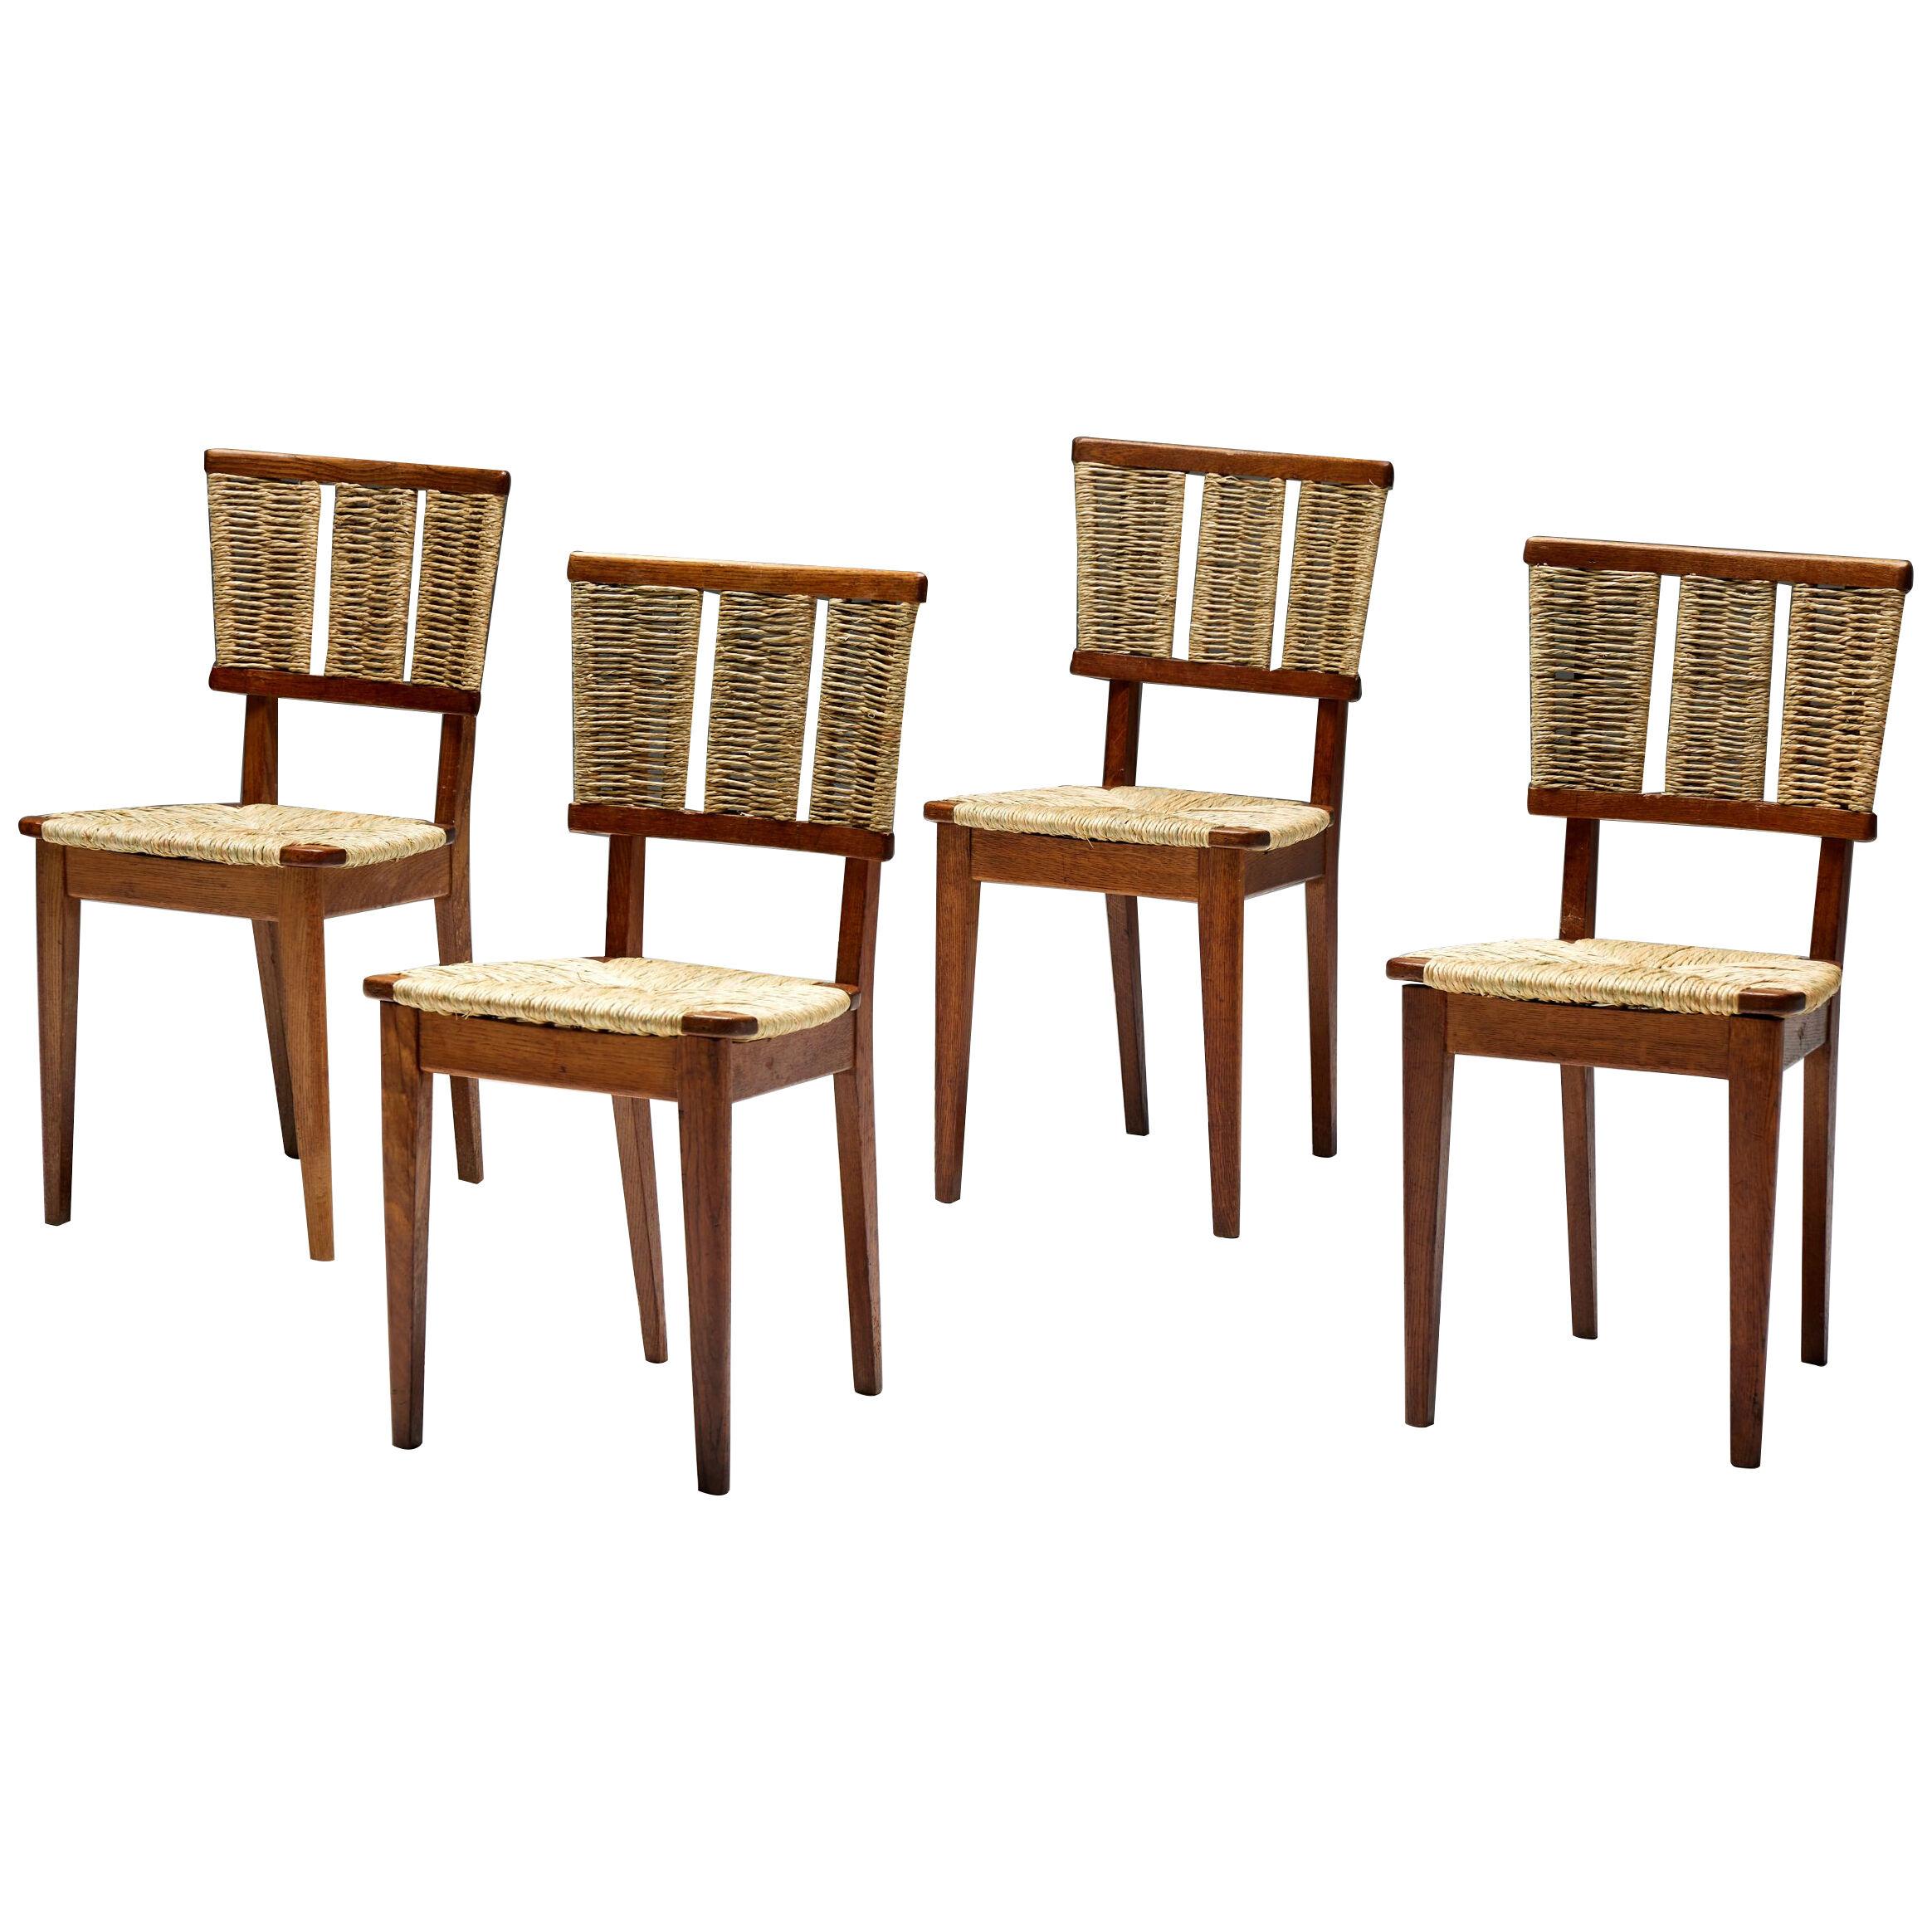 Mart Stam 'A2-1' Dining Chairs in Oak and Wicker, 1940s